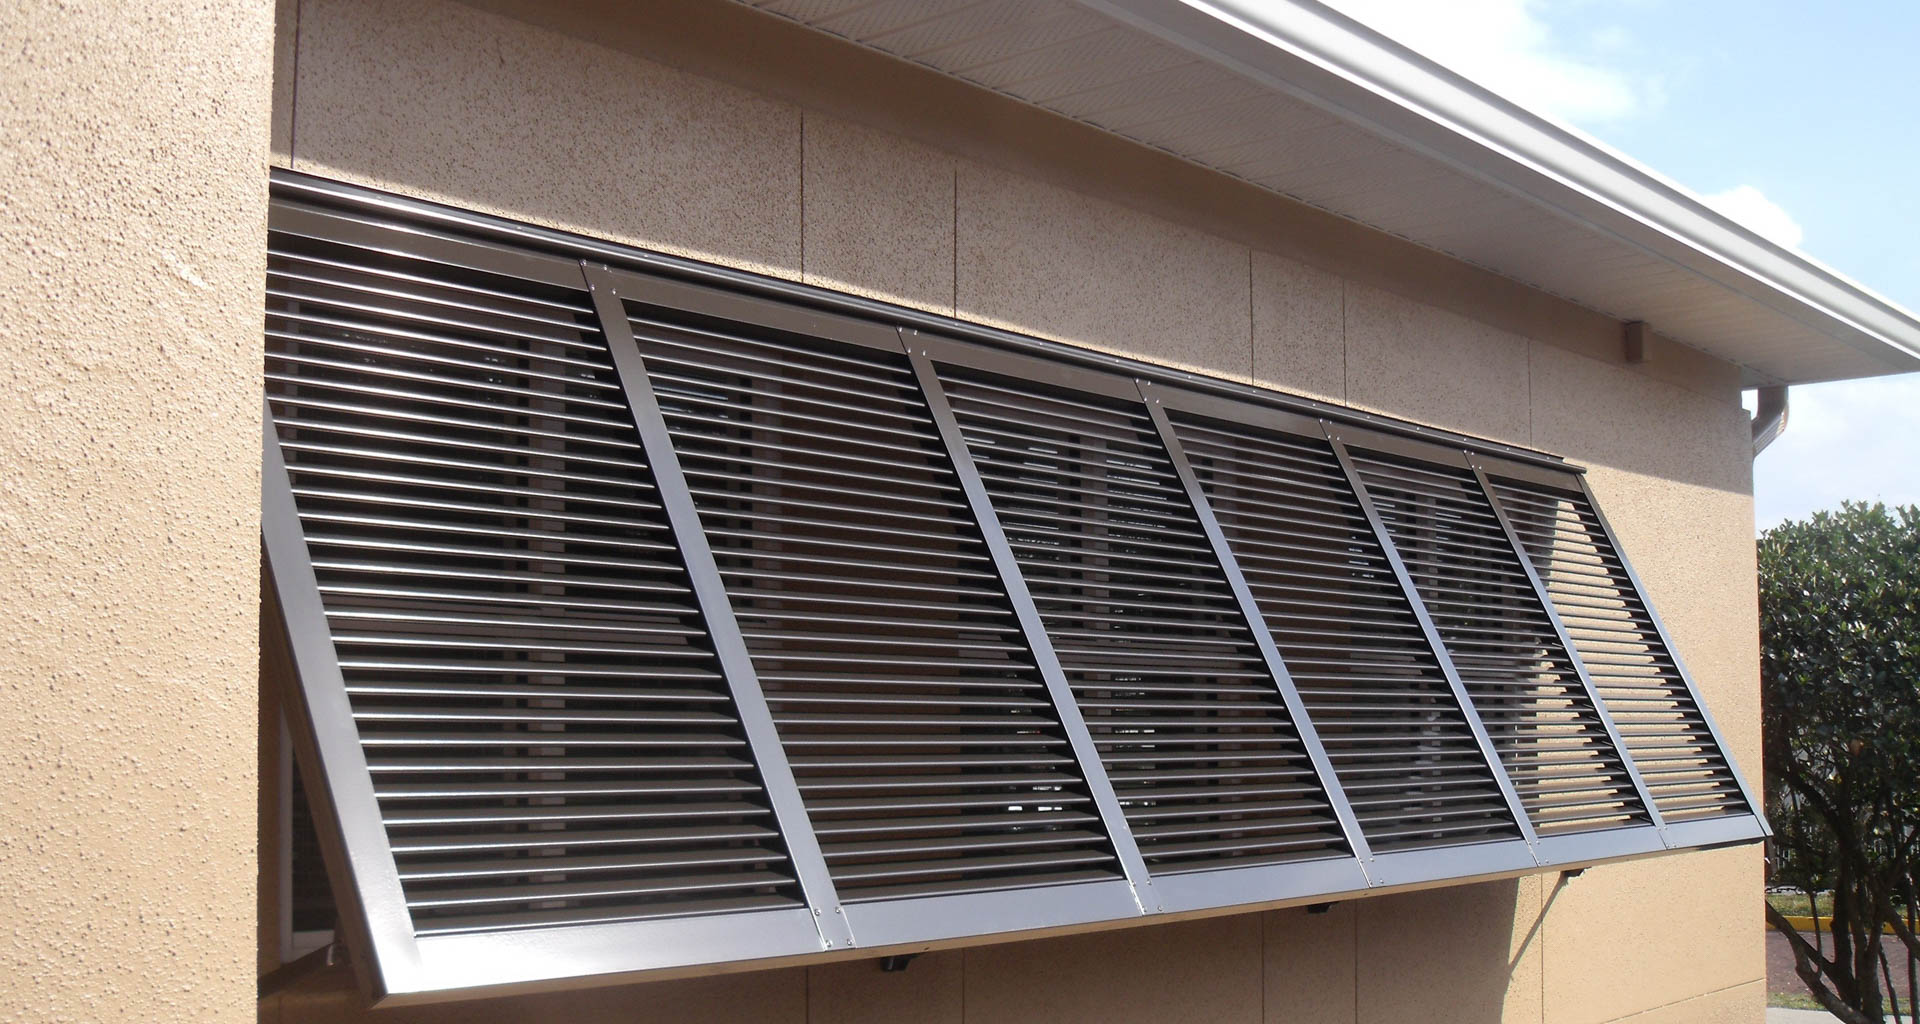 Storm shutters, like the metal Bahama shutters from Sun Barrier Products, can be used to protect vulnerable windows in your home. Image: Sun Barrier Products.